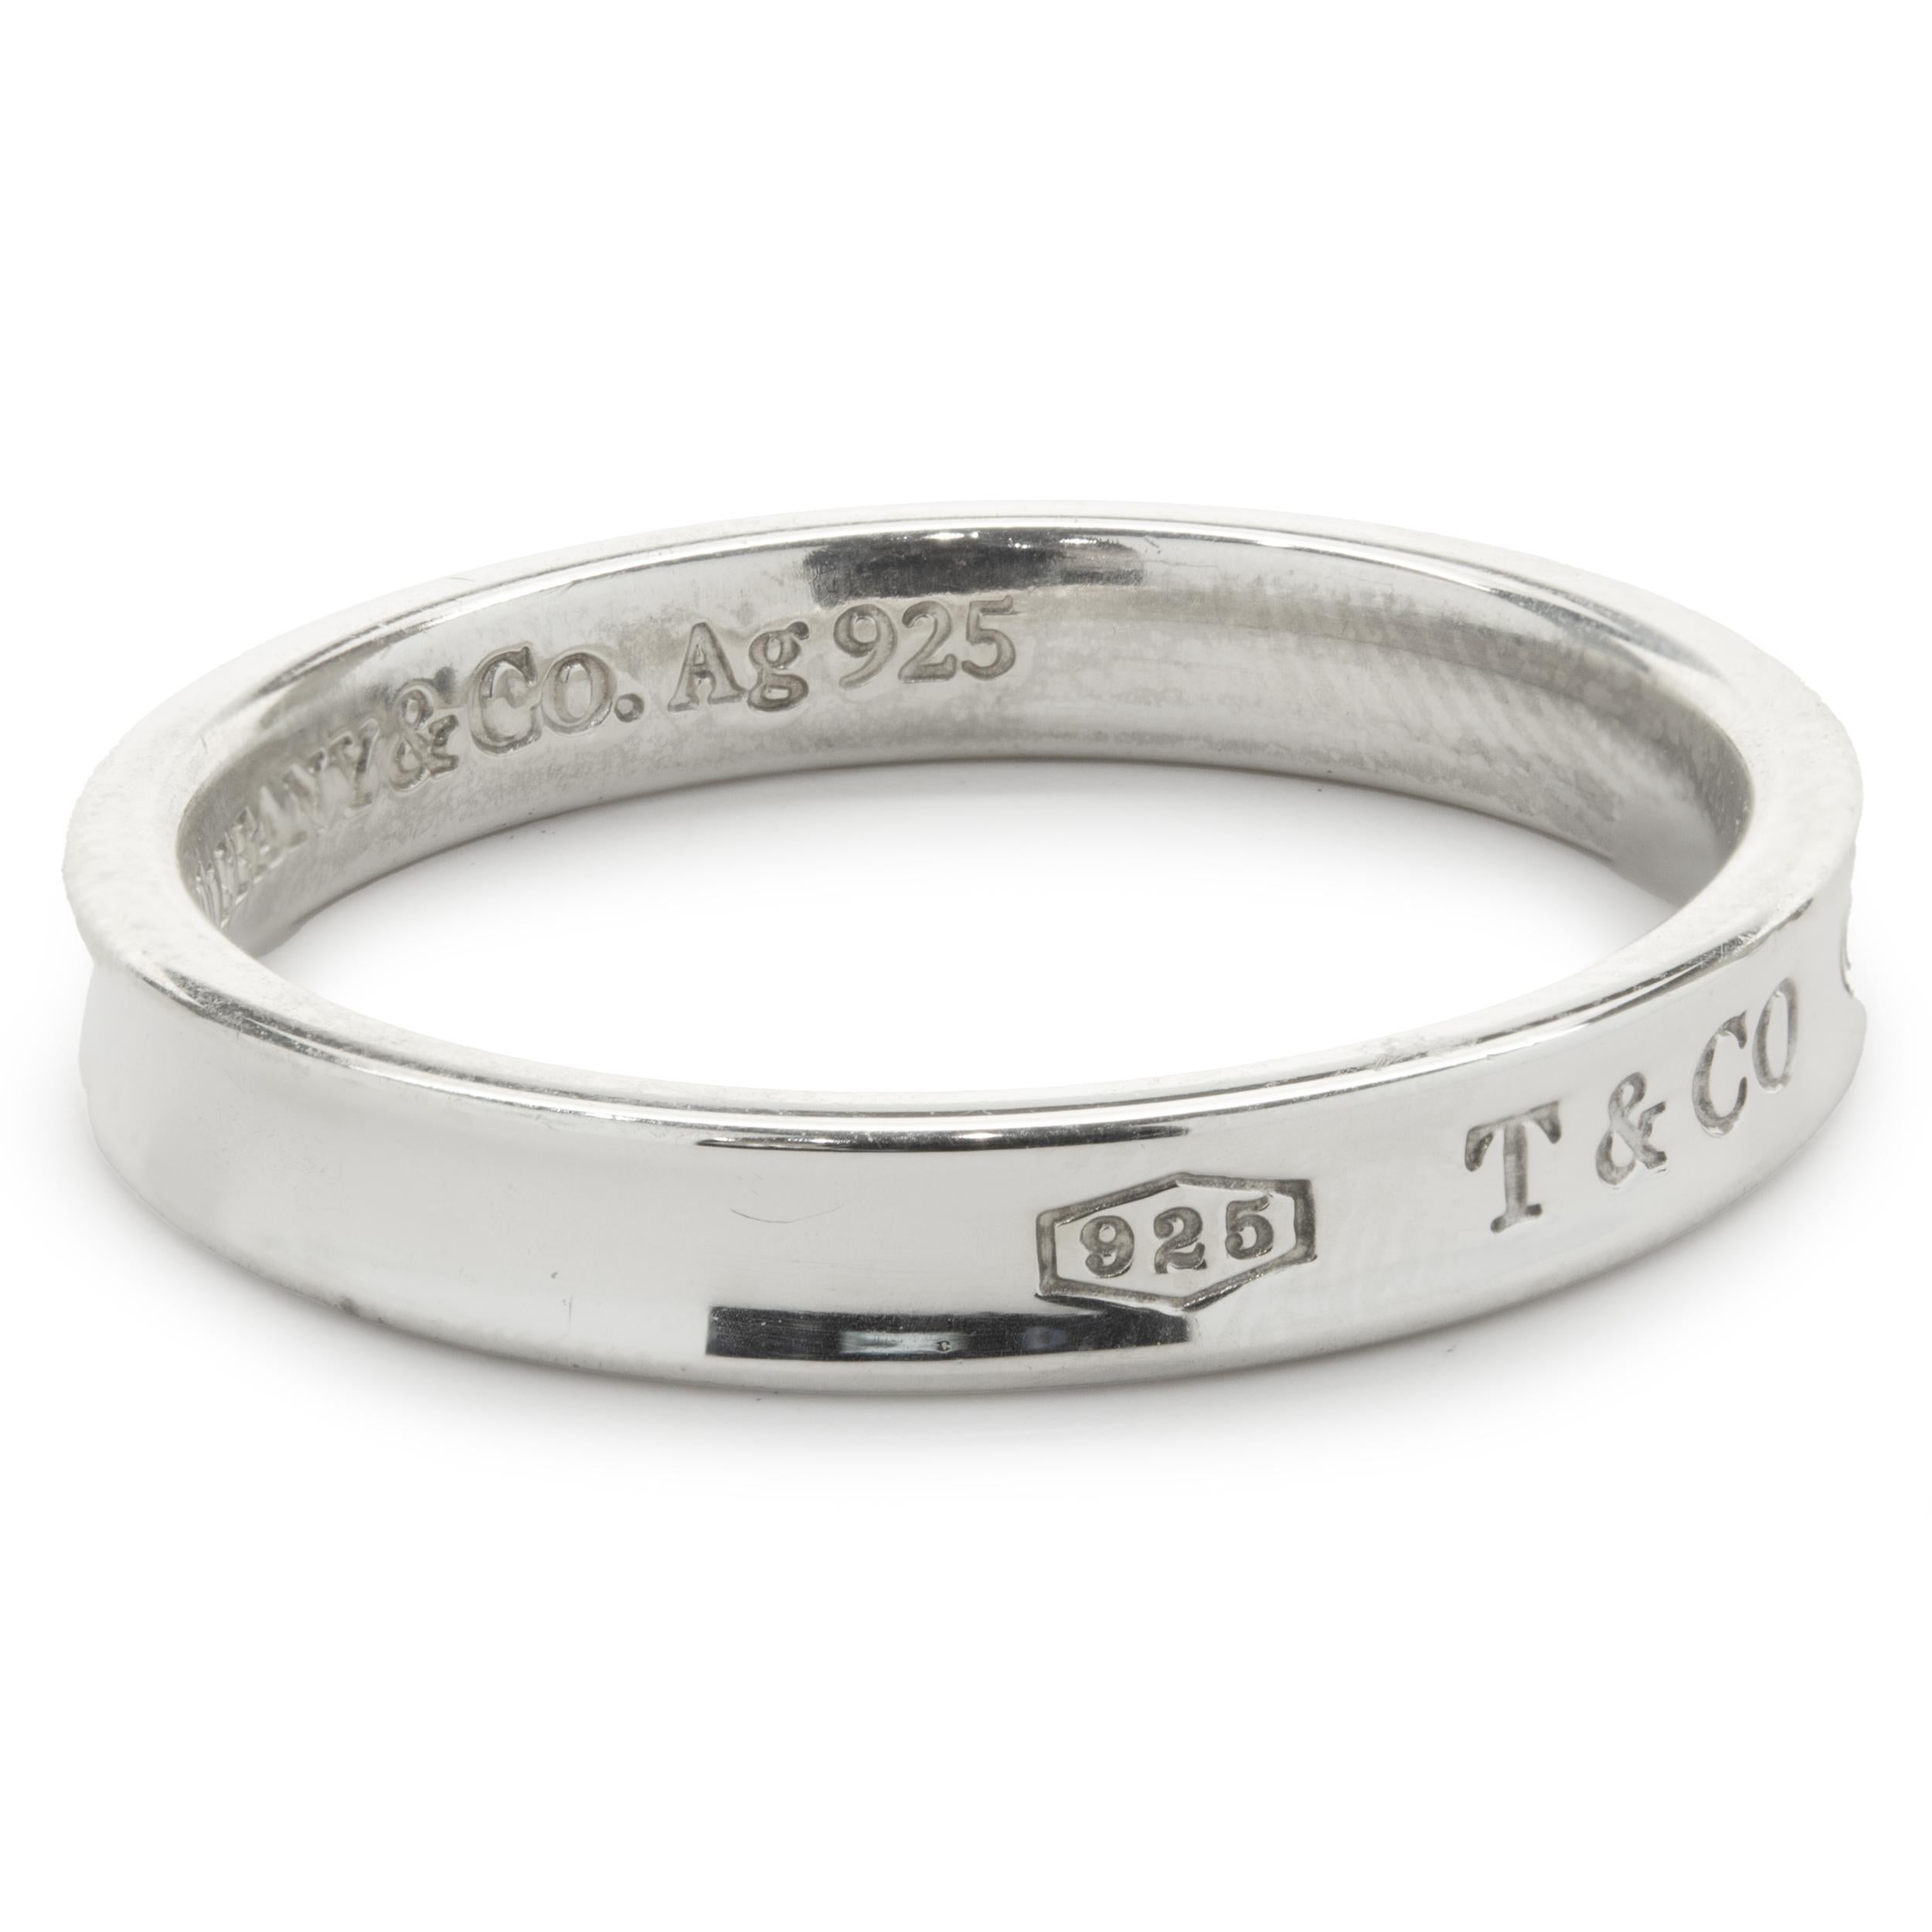 Designer: Tiffany & Co.
Material: Sterling Silver
Dimensions: ring measures 4mm wide
Size: 12
Weight: 4.91 grams